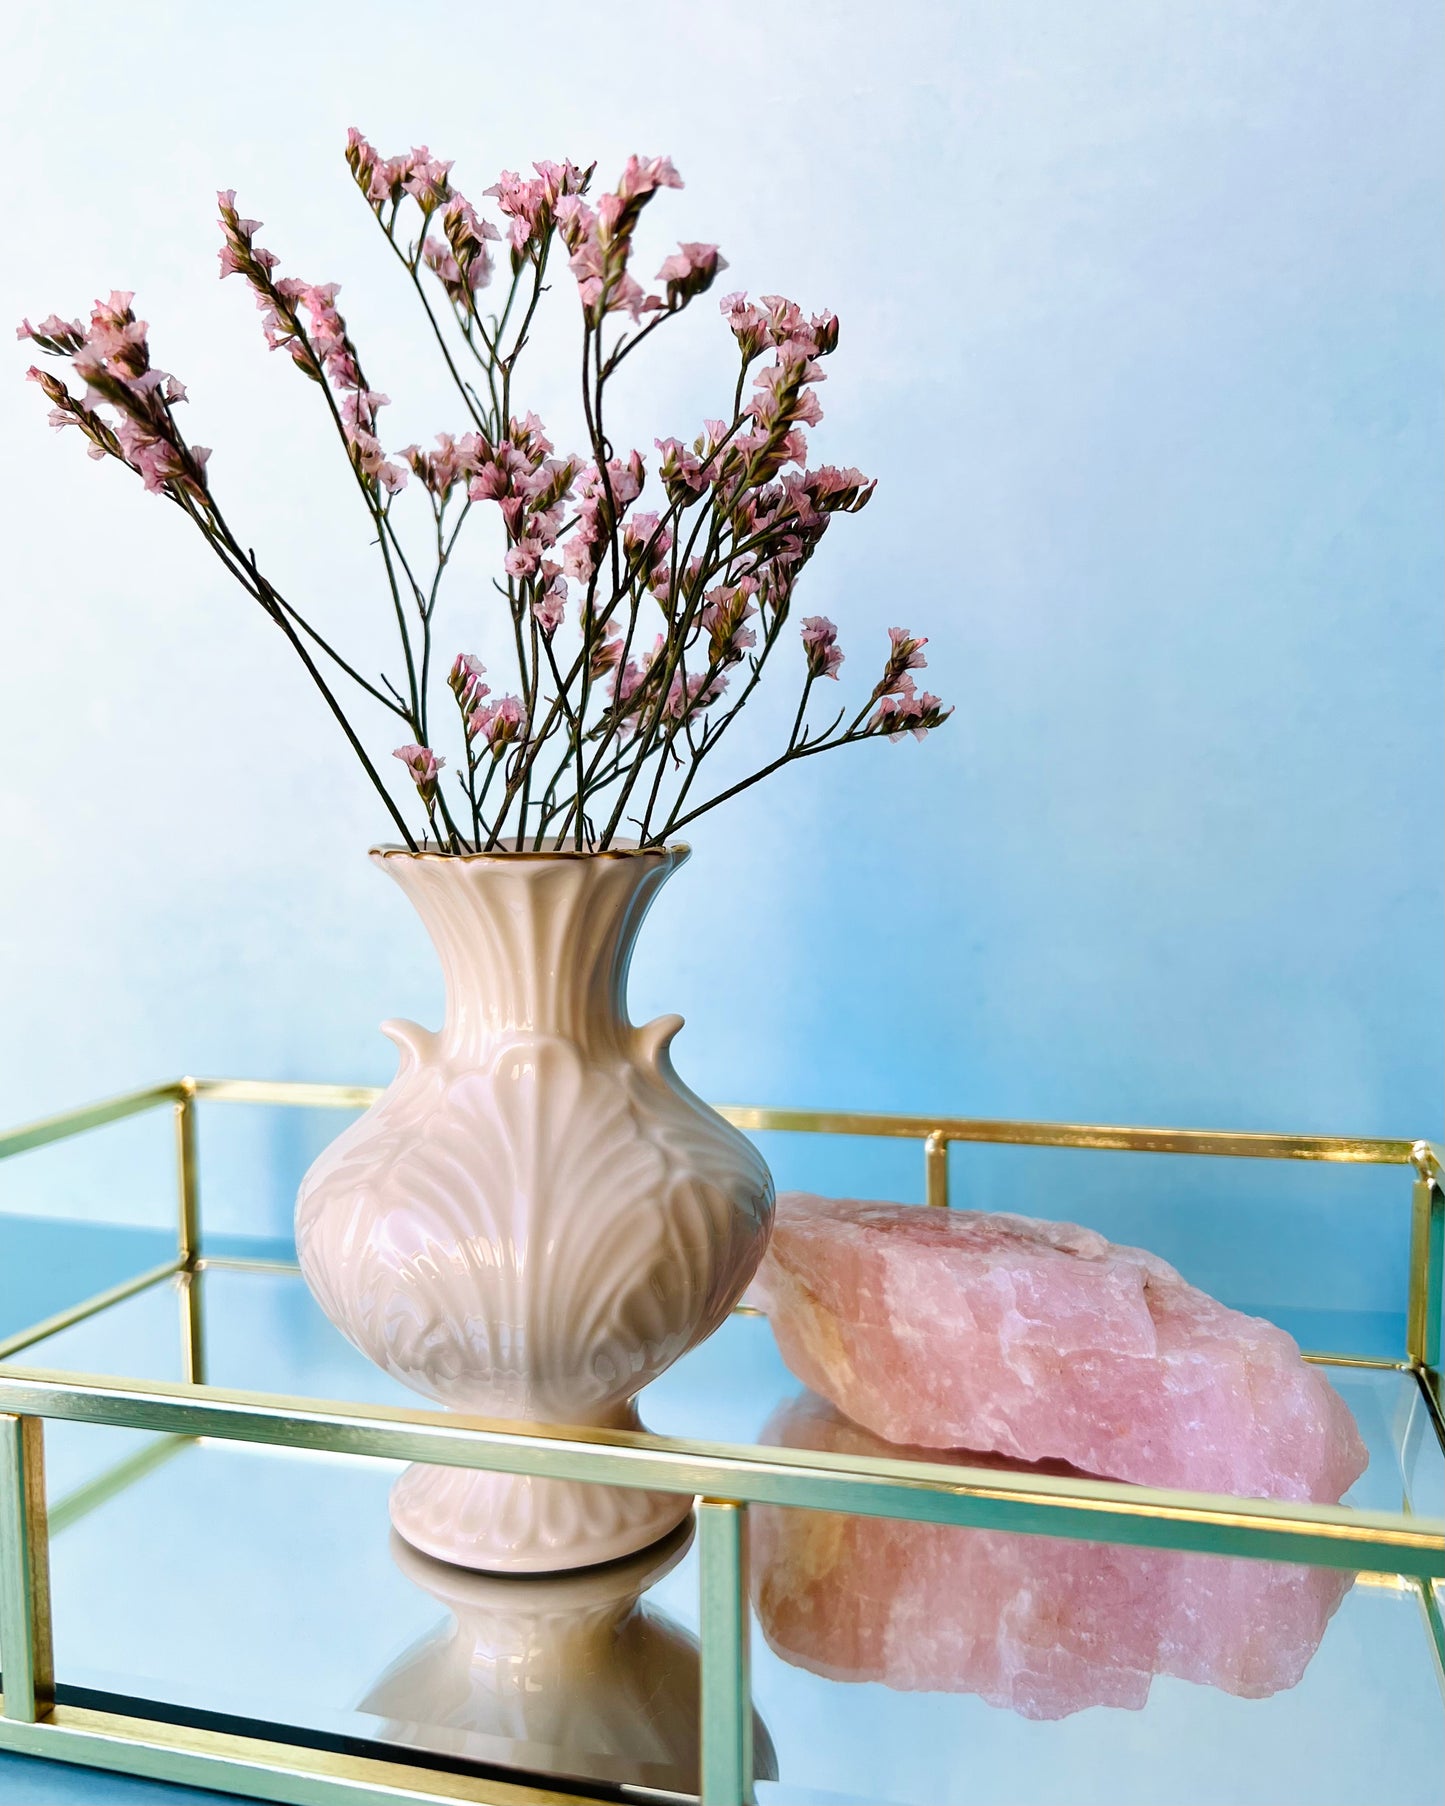 The vintage bud vase filled with sprigs of little pink flowers on a mirrored tray with gold edges with a pink stone behind